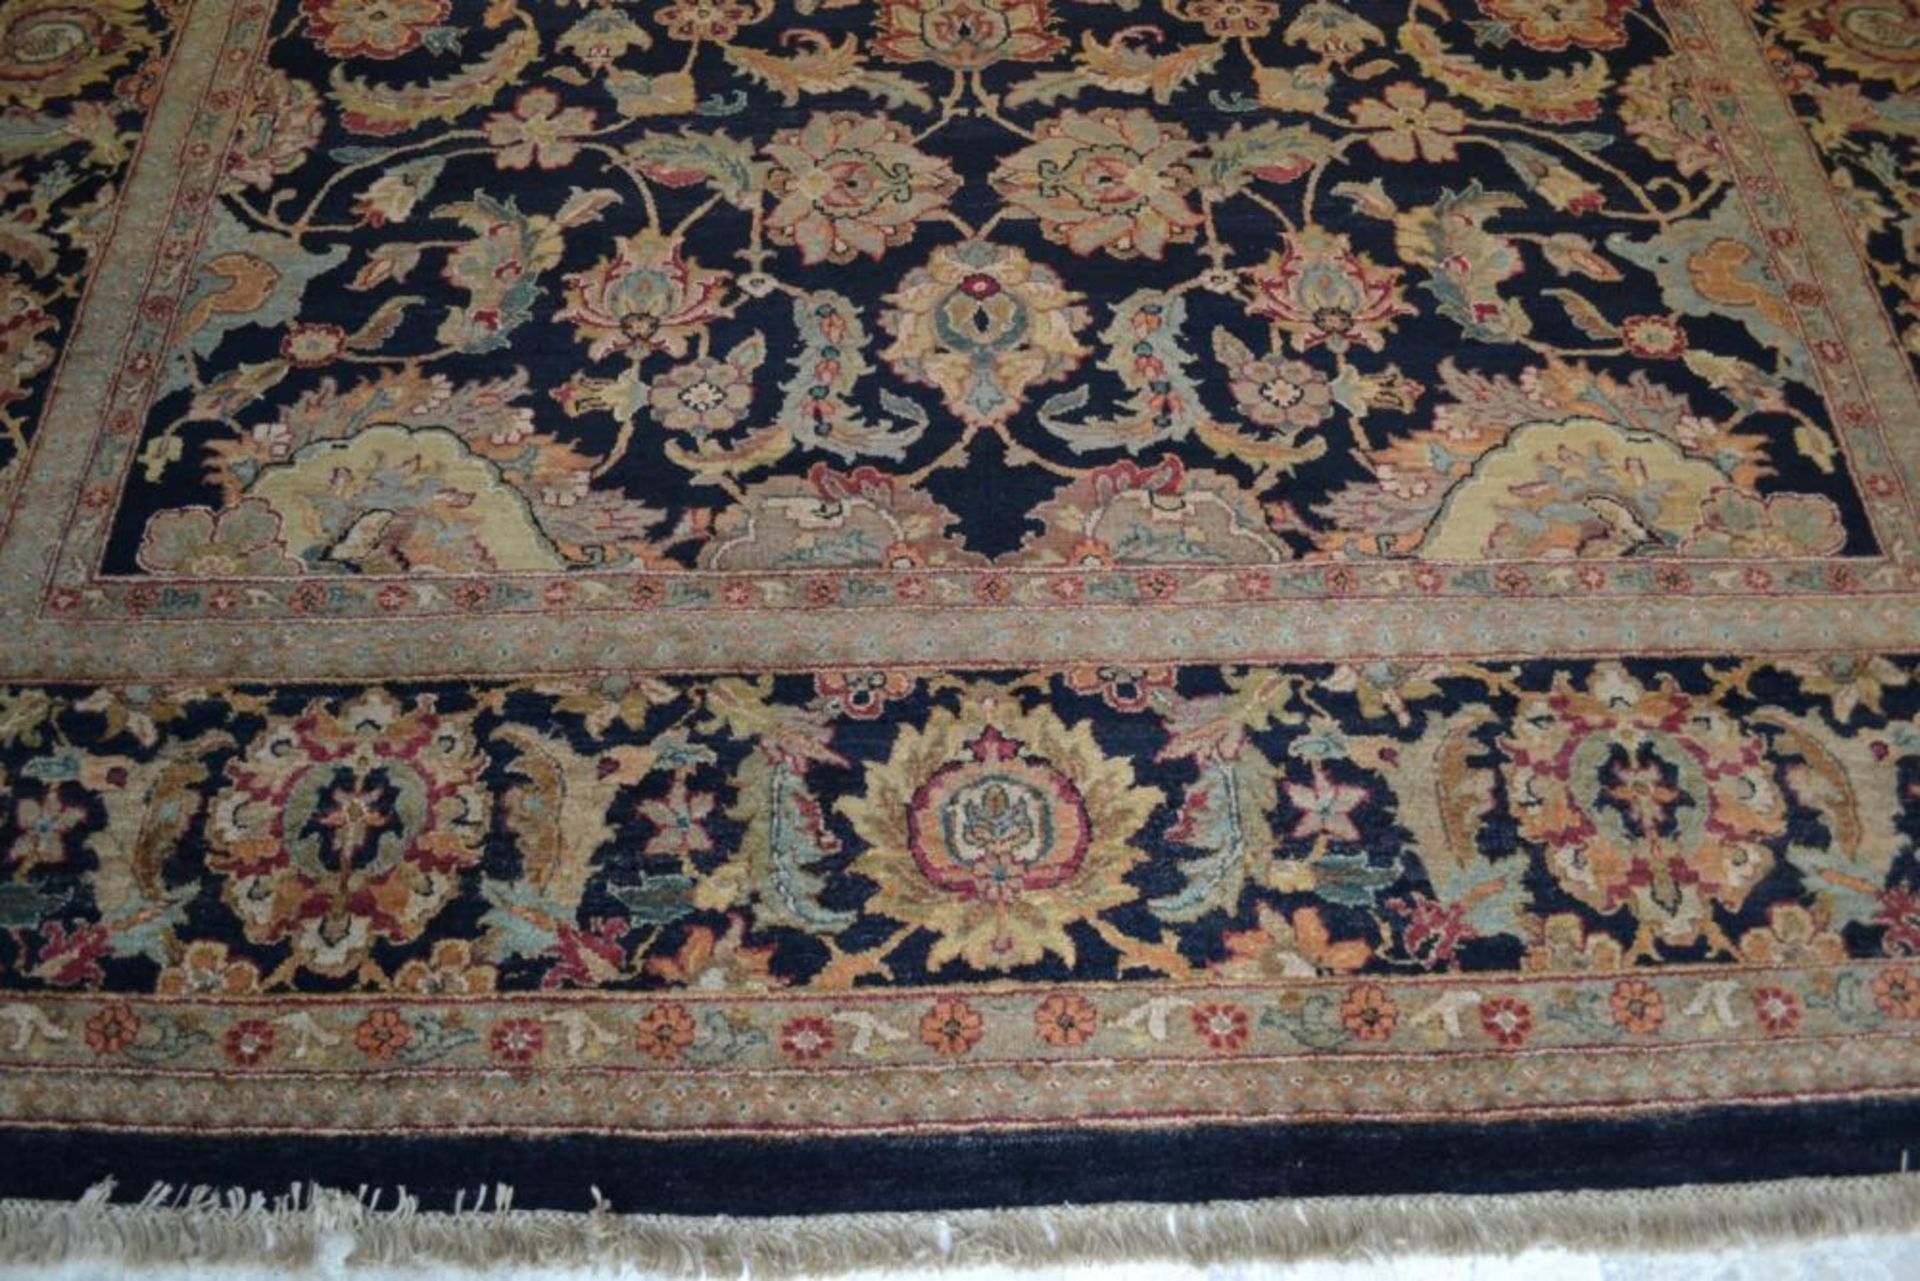 1 x Black Jaipur Handwoven Carpet - Made From Vegetable Dyed Handspun Wool - Dimensions: 367x277cm - - Image 6 of 16